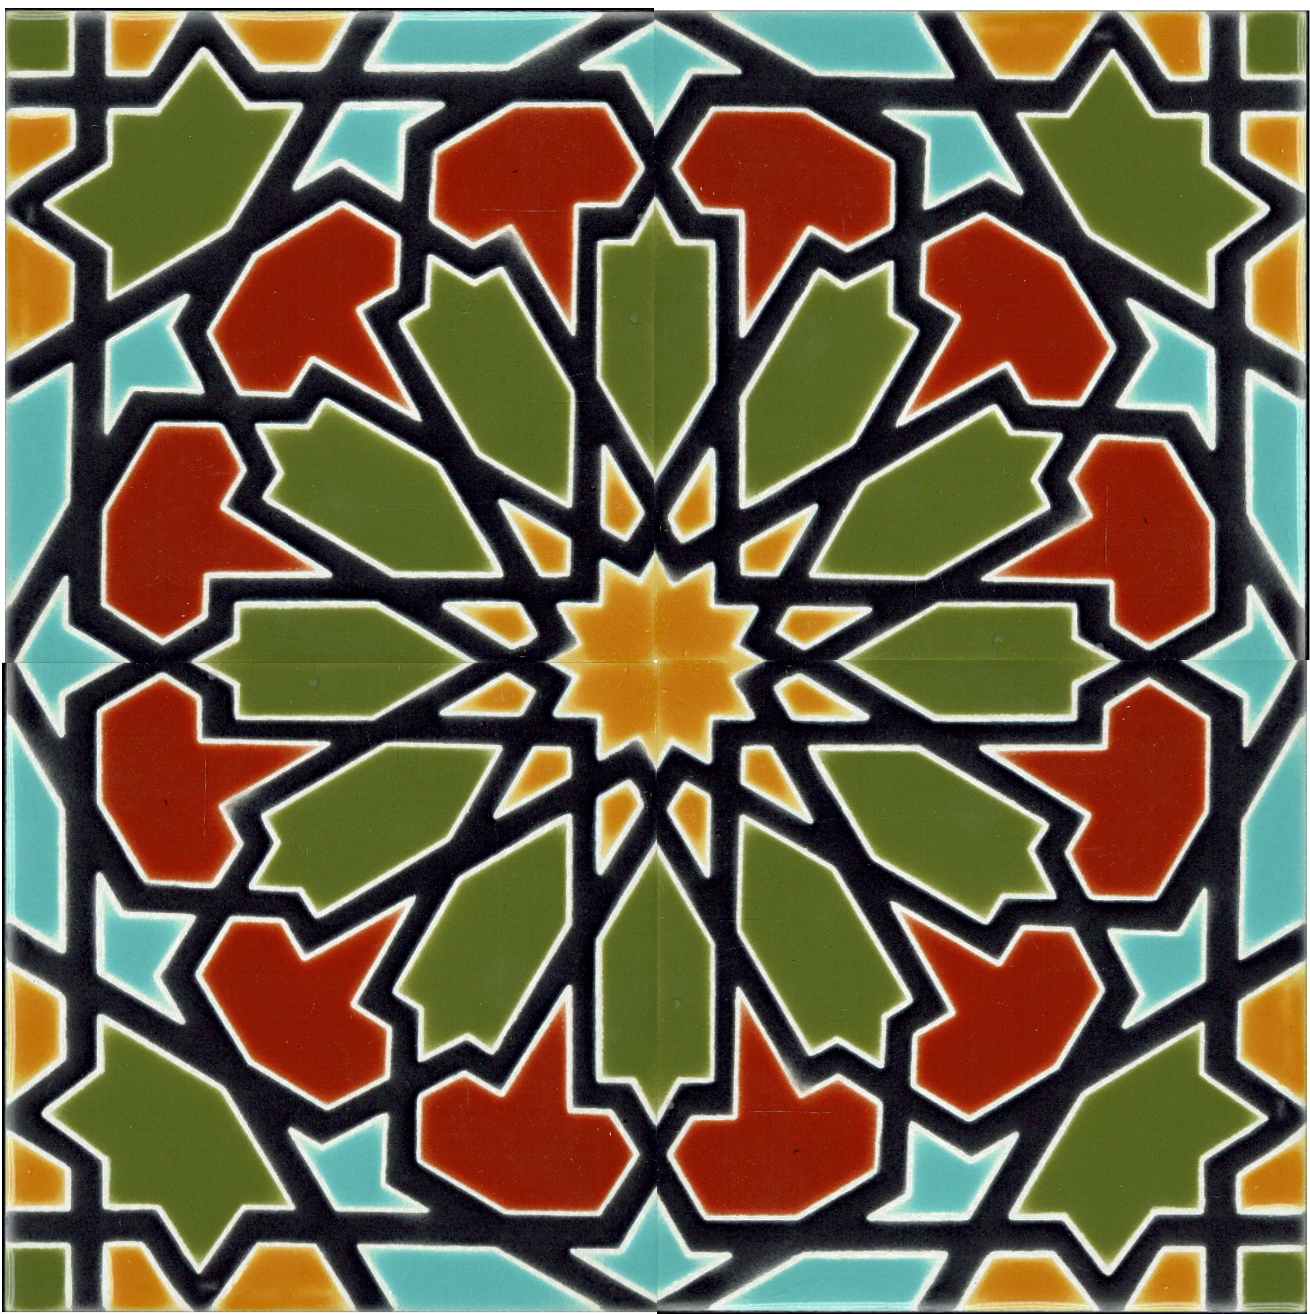 Persian Star 2 in Festival (6"x6") - Handpainted Ceramic Tile Second for Kitchen, Bathroom, Wall & Table Decor